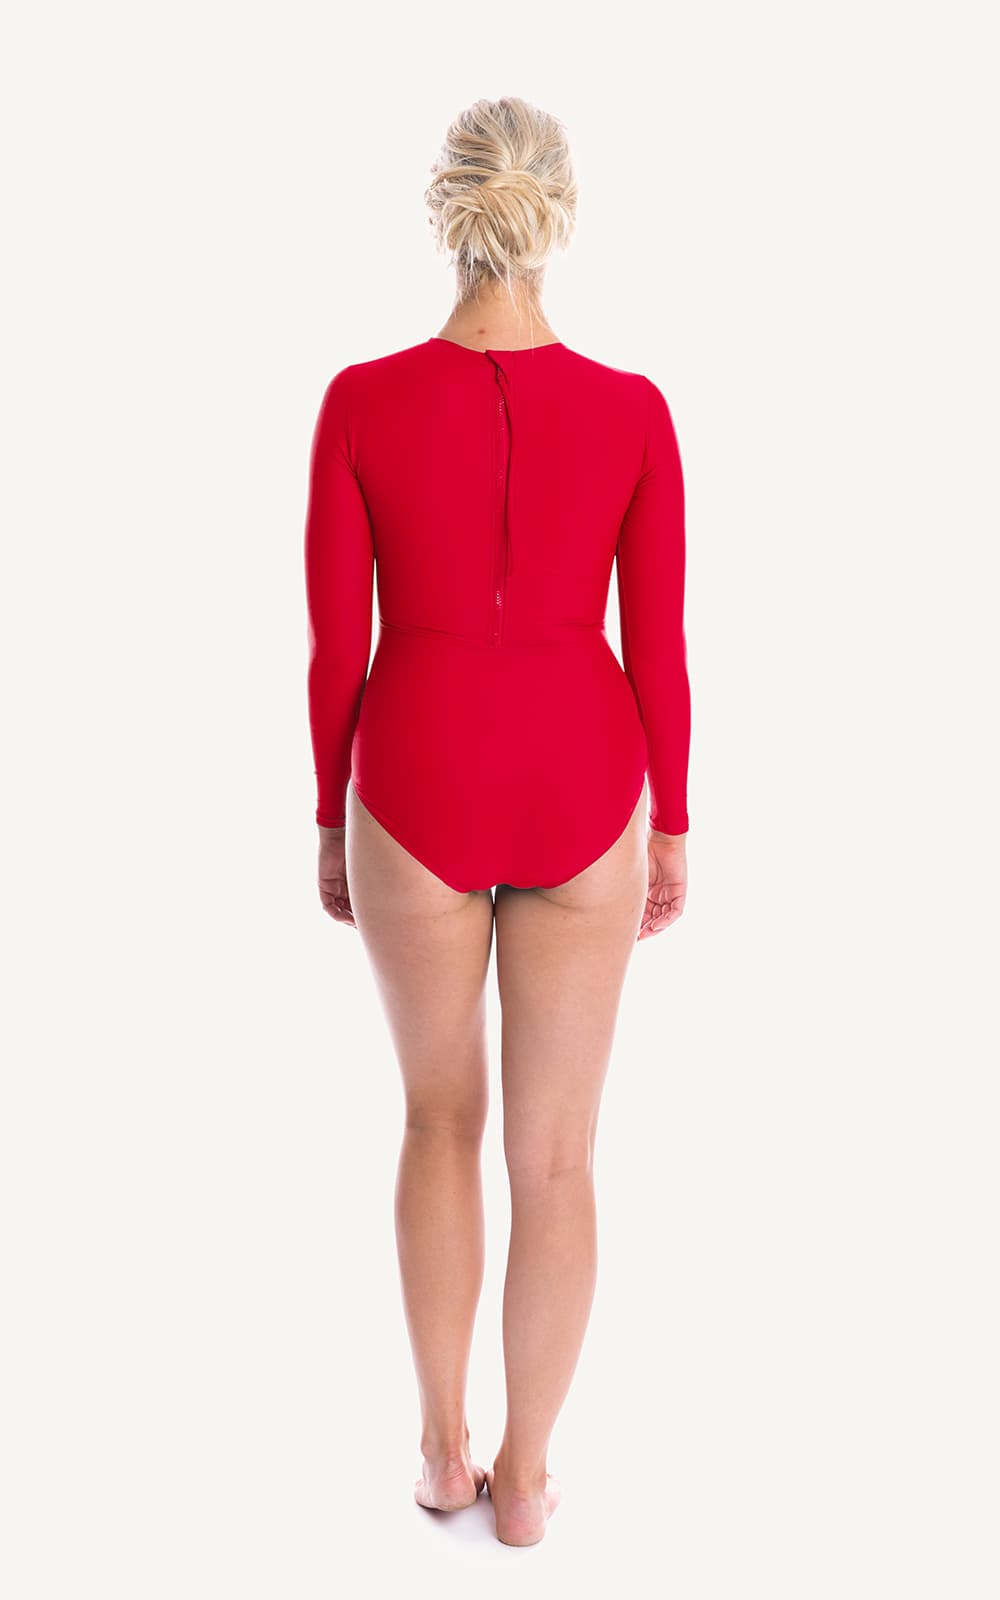 Long Sleeve One piece Red Ruch Sun Protection Bra Bust Support Cup Sizes Tummy Moulded Zip Swim Swimsuit Swimwear Swimming Beachwear Women